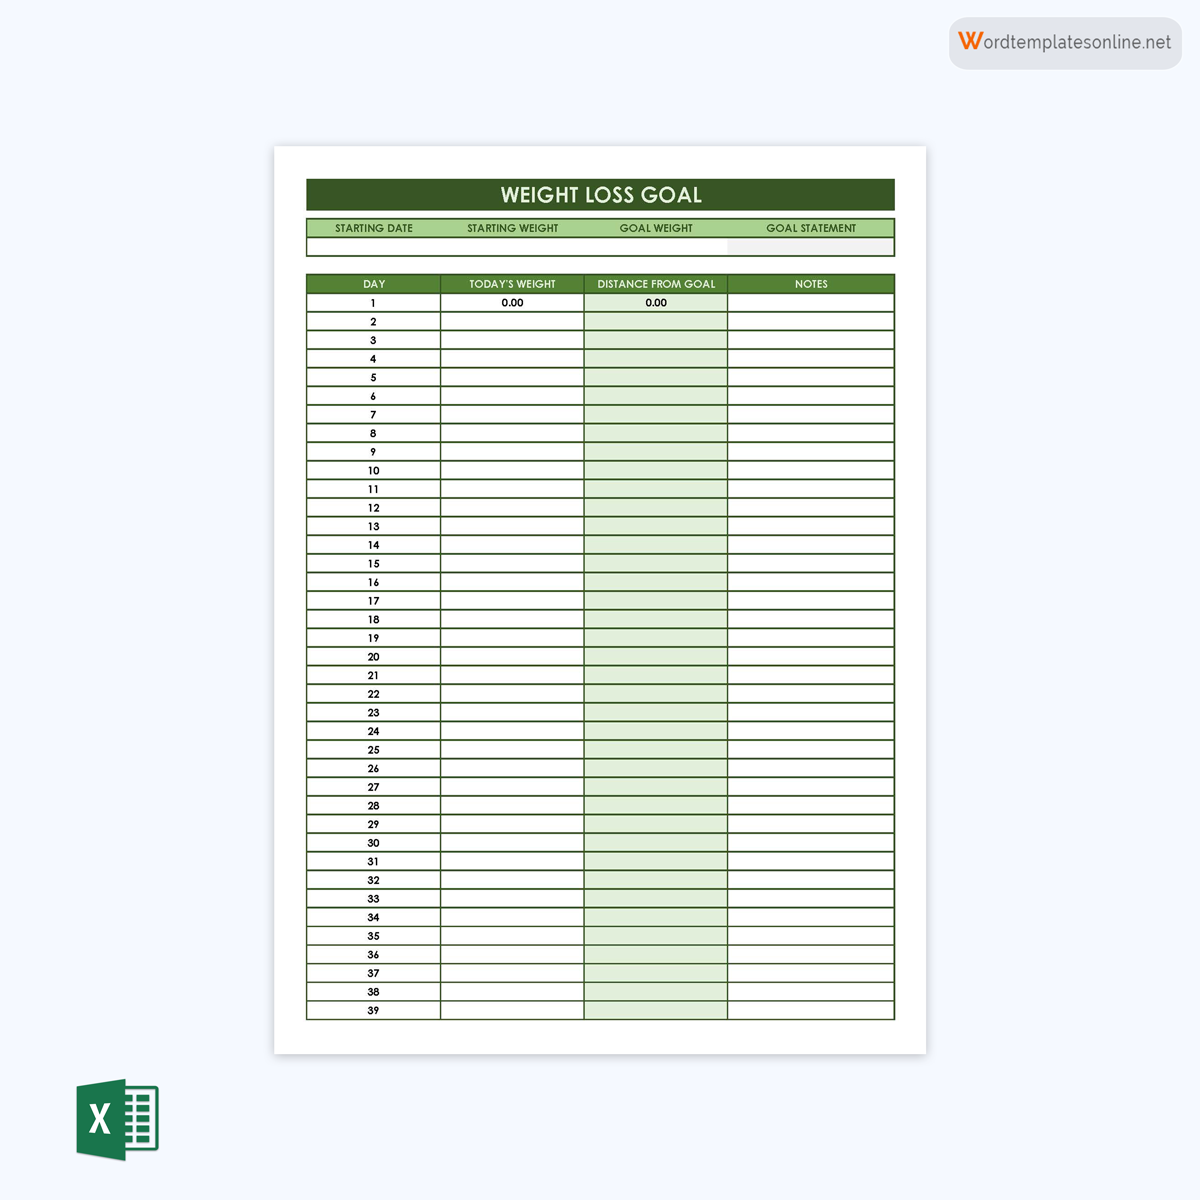 Free Downloadable Weight Loss Goals Worksheet Sample as Excel Sheet